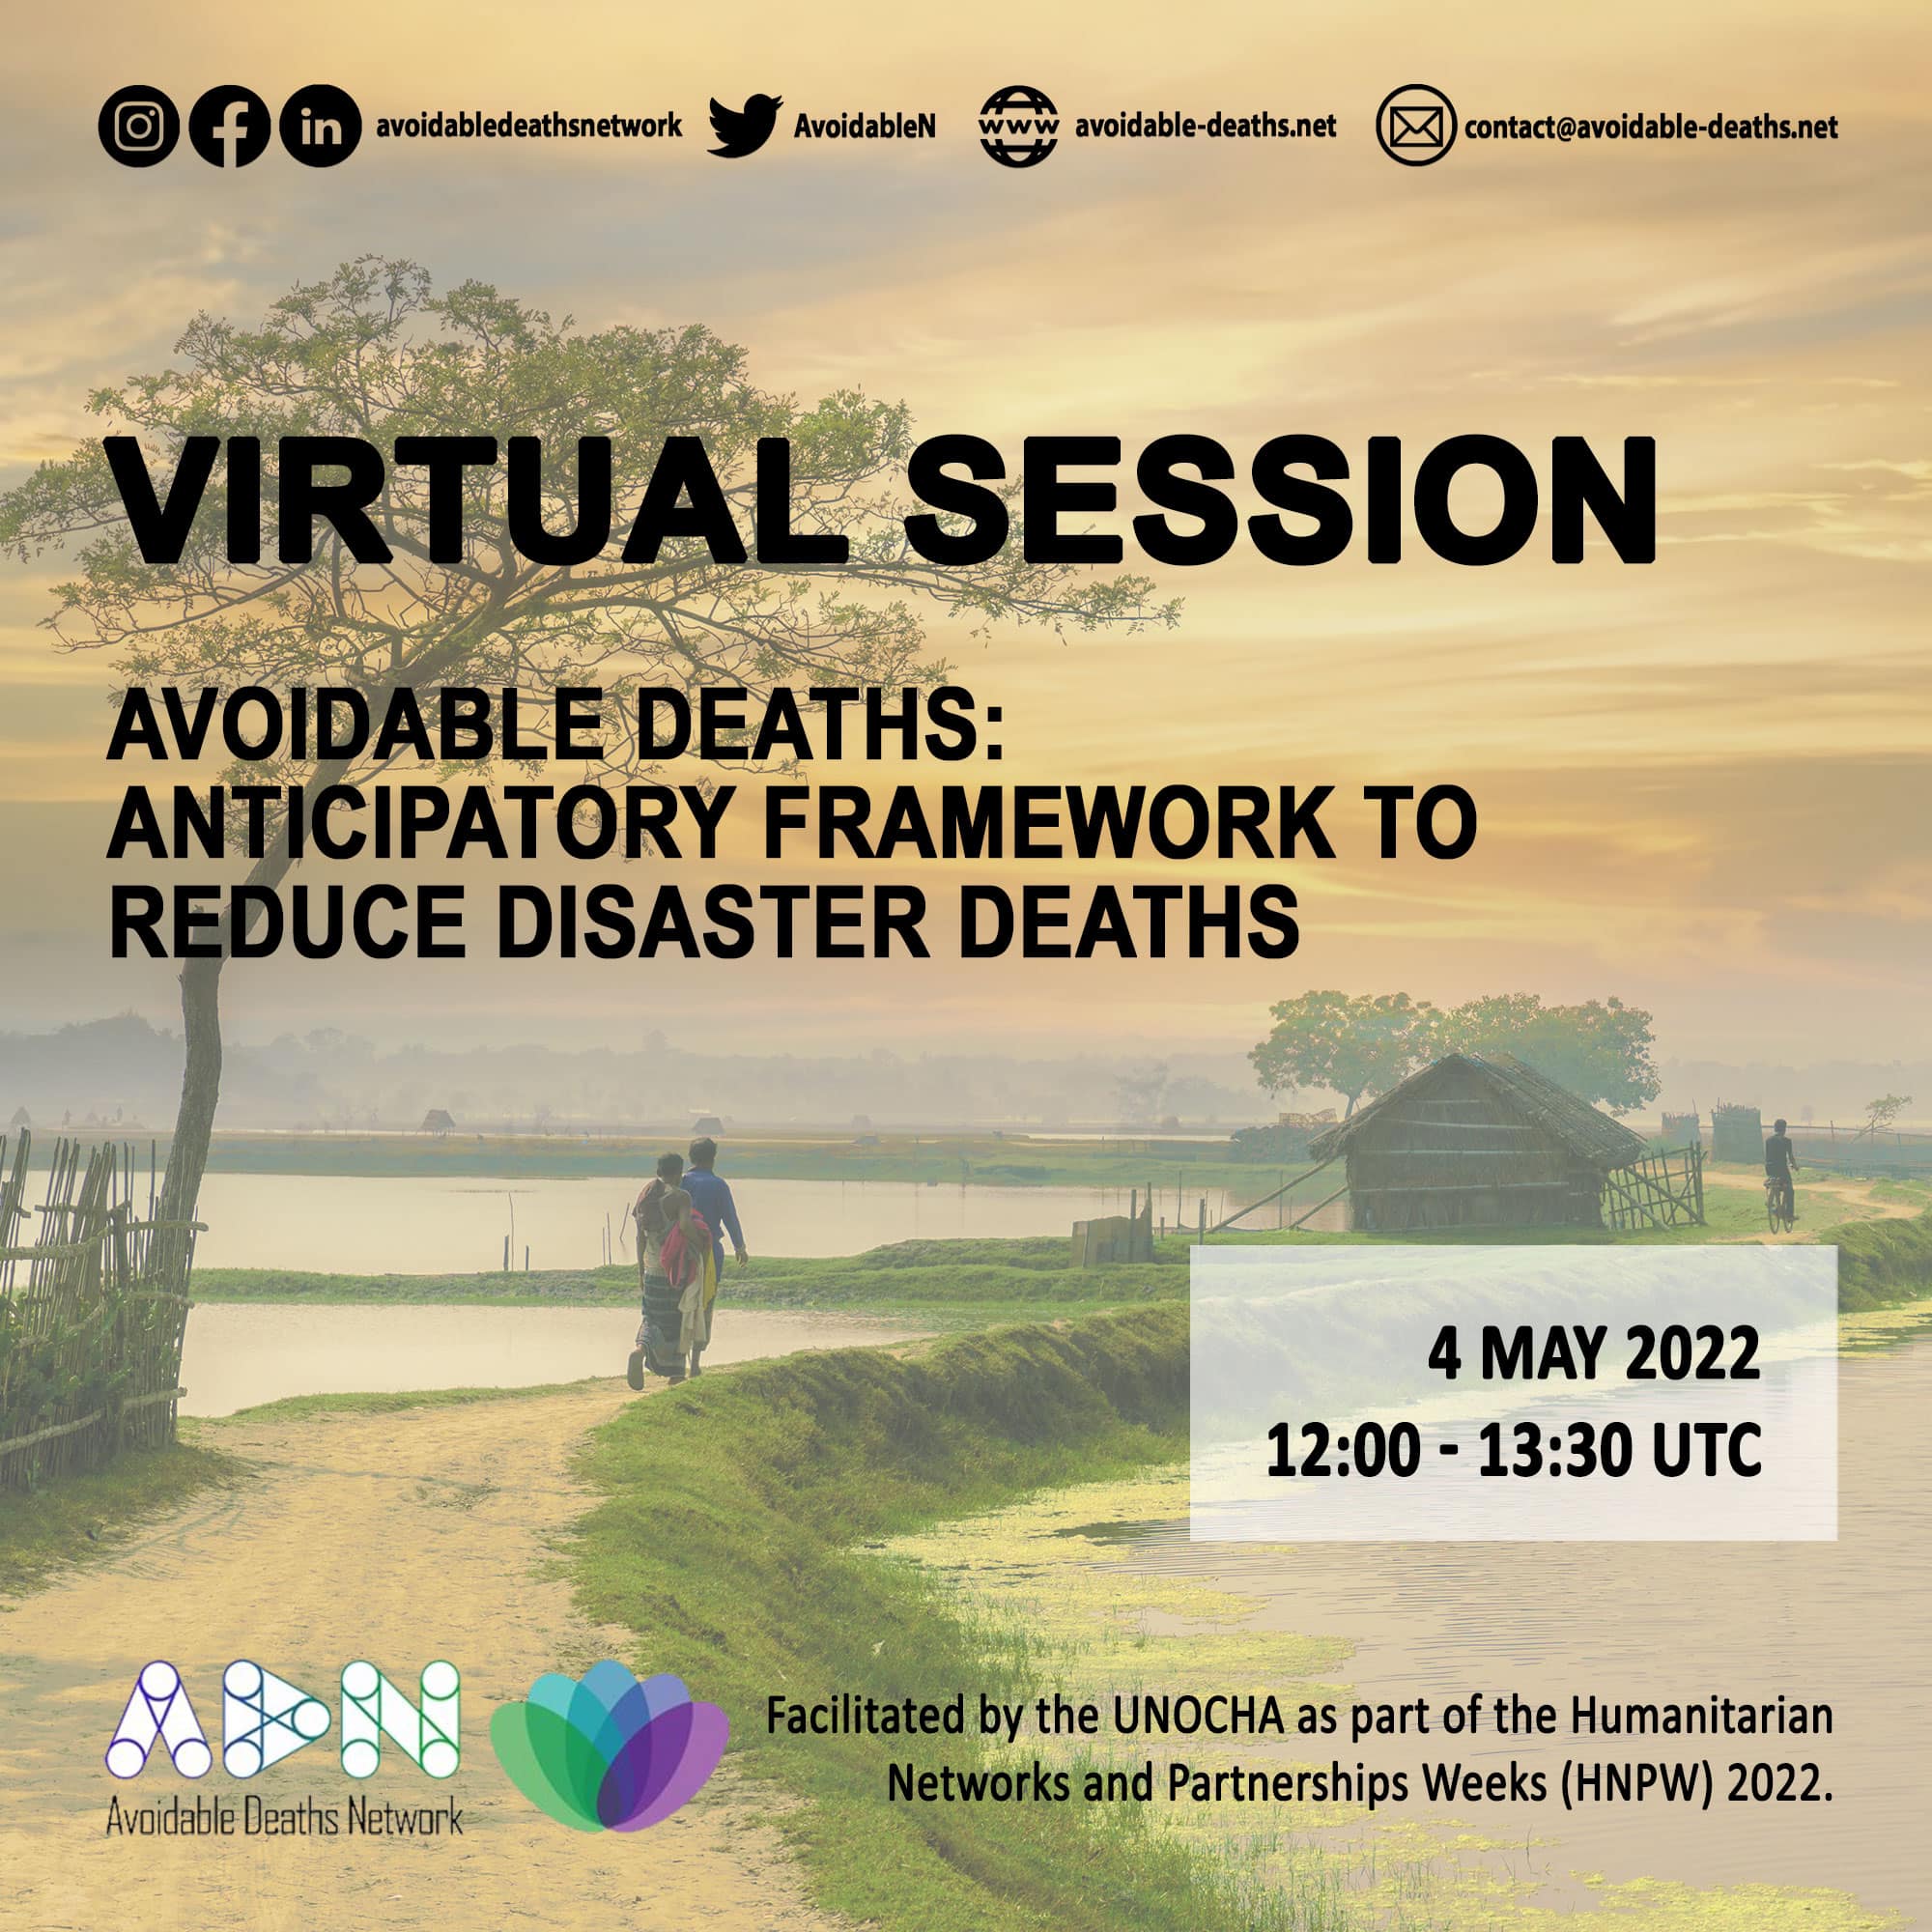 Virtual Session on Avoidable Deaths